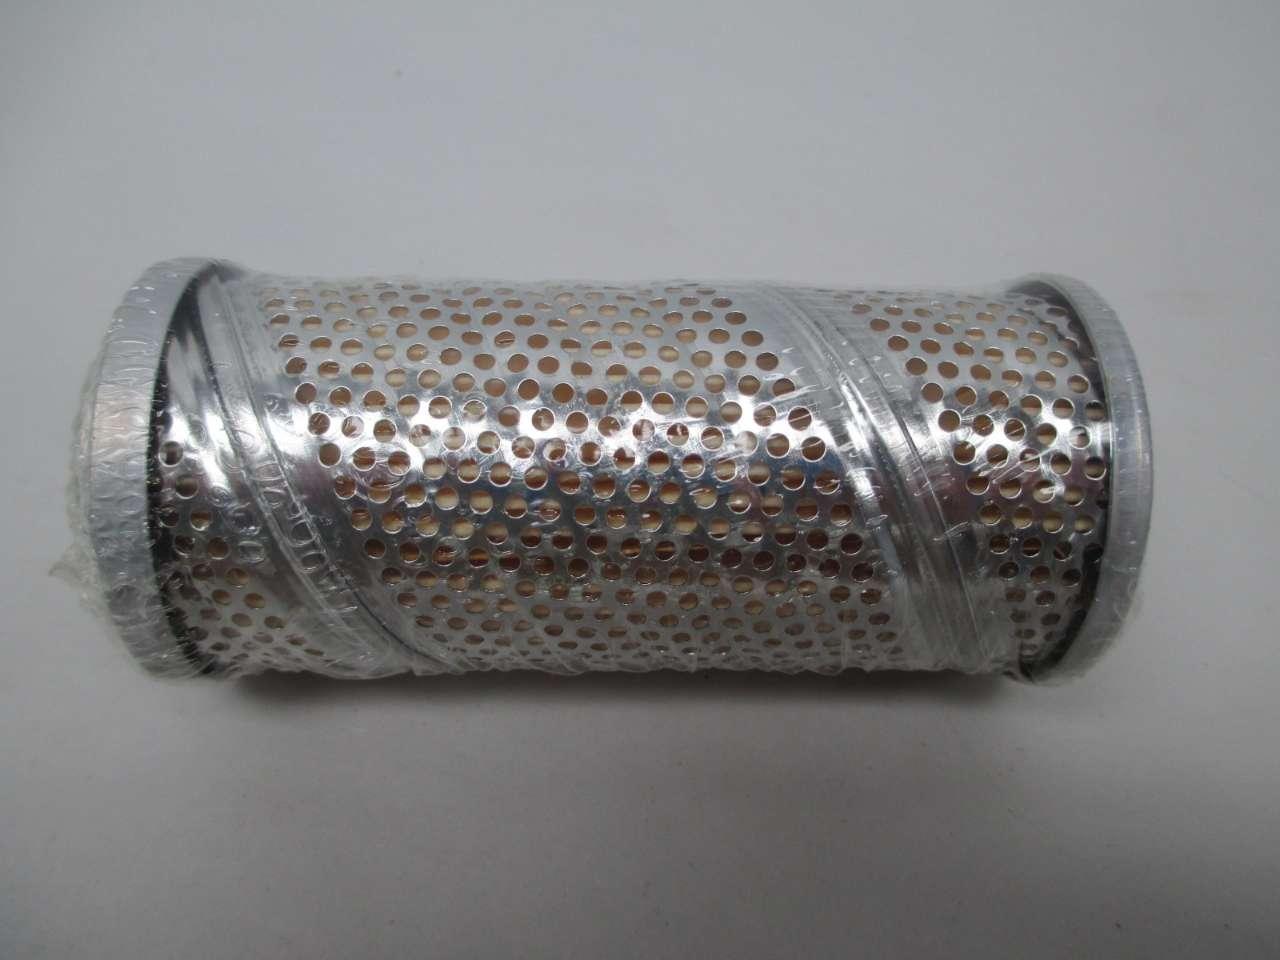 New Genuine Fife Corp Replacement Hydraulic Filter Element p/n 04723-001 